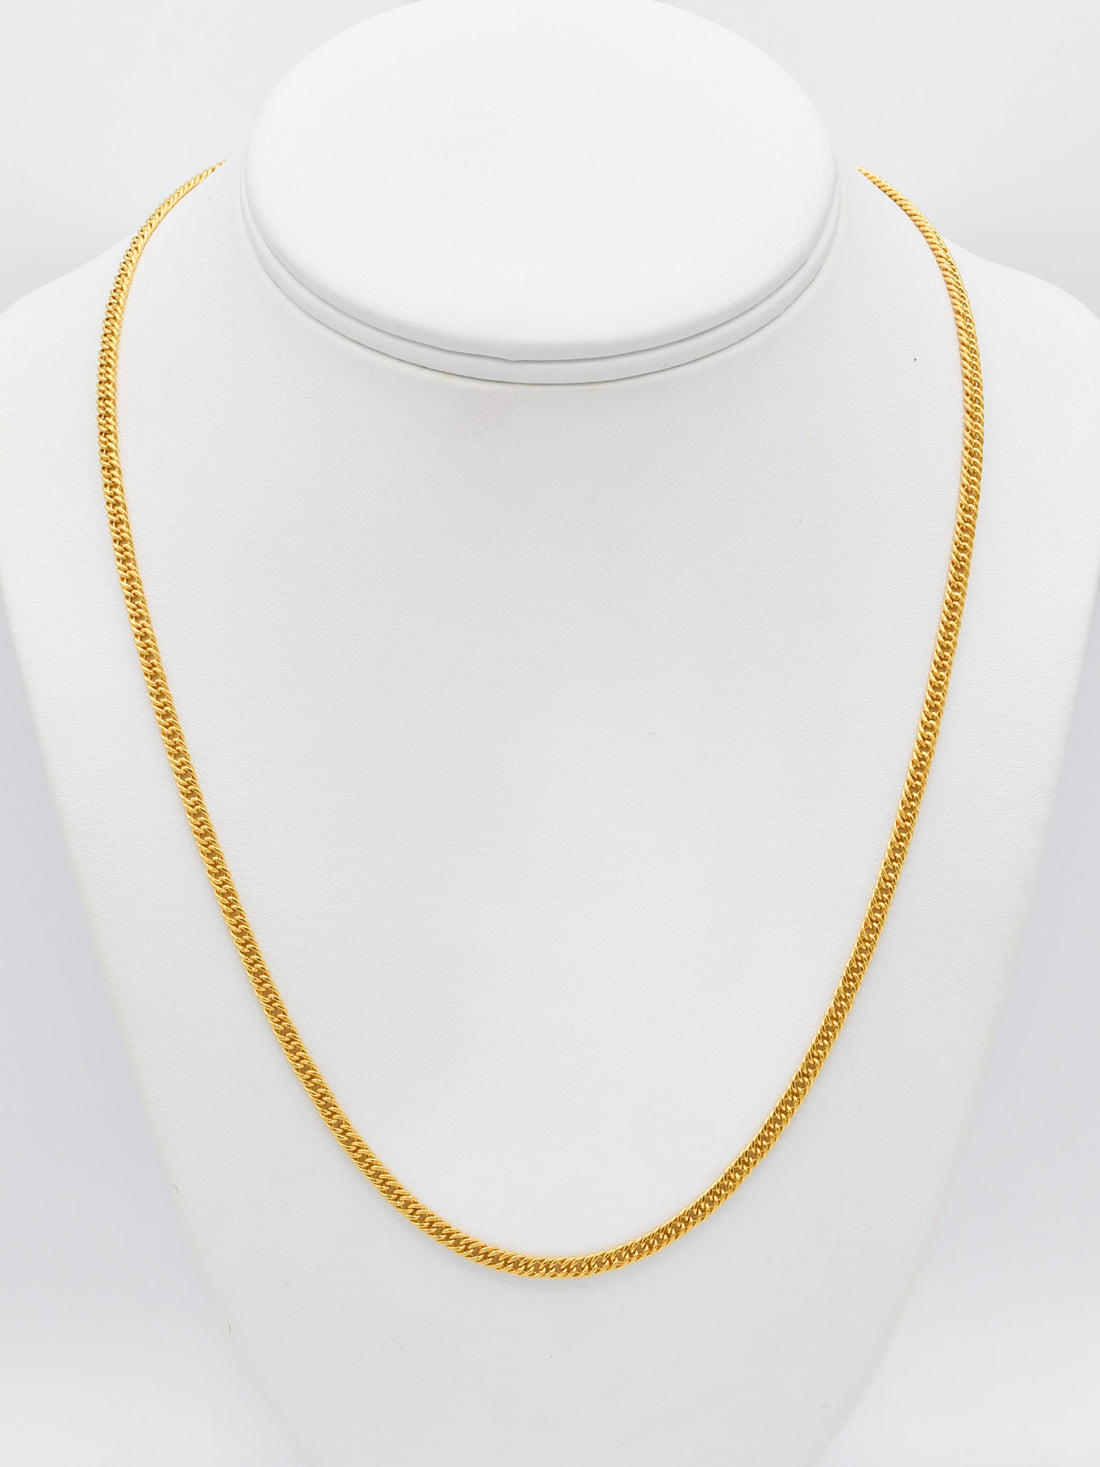 22ct Gold Hollow Chain - Roop Darshan